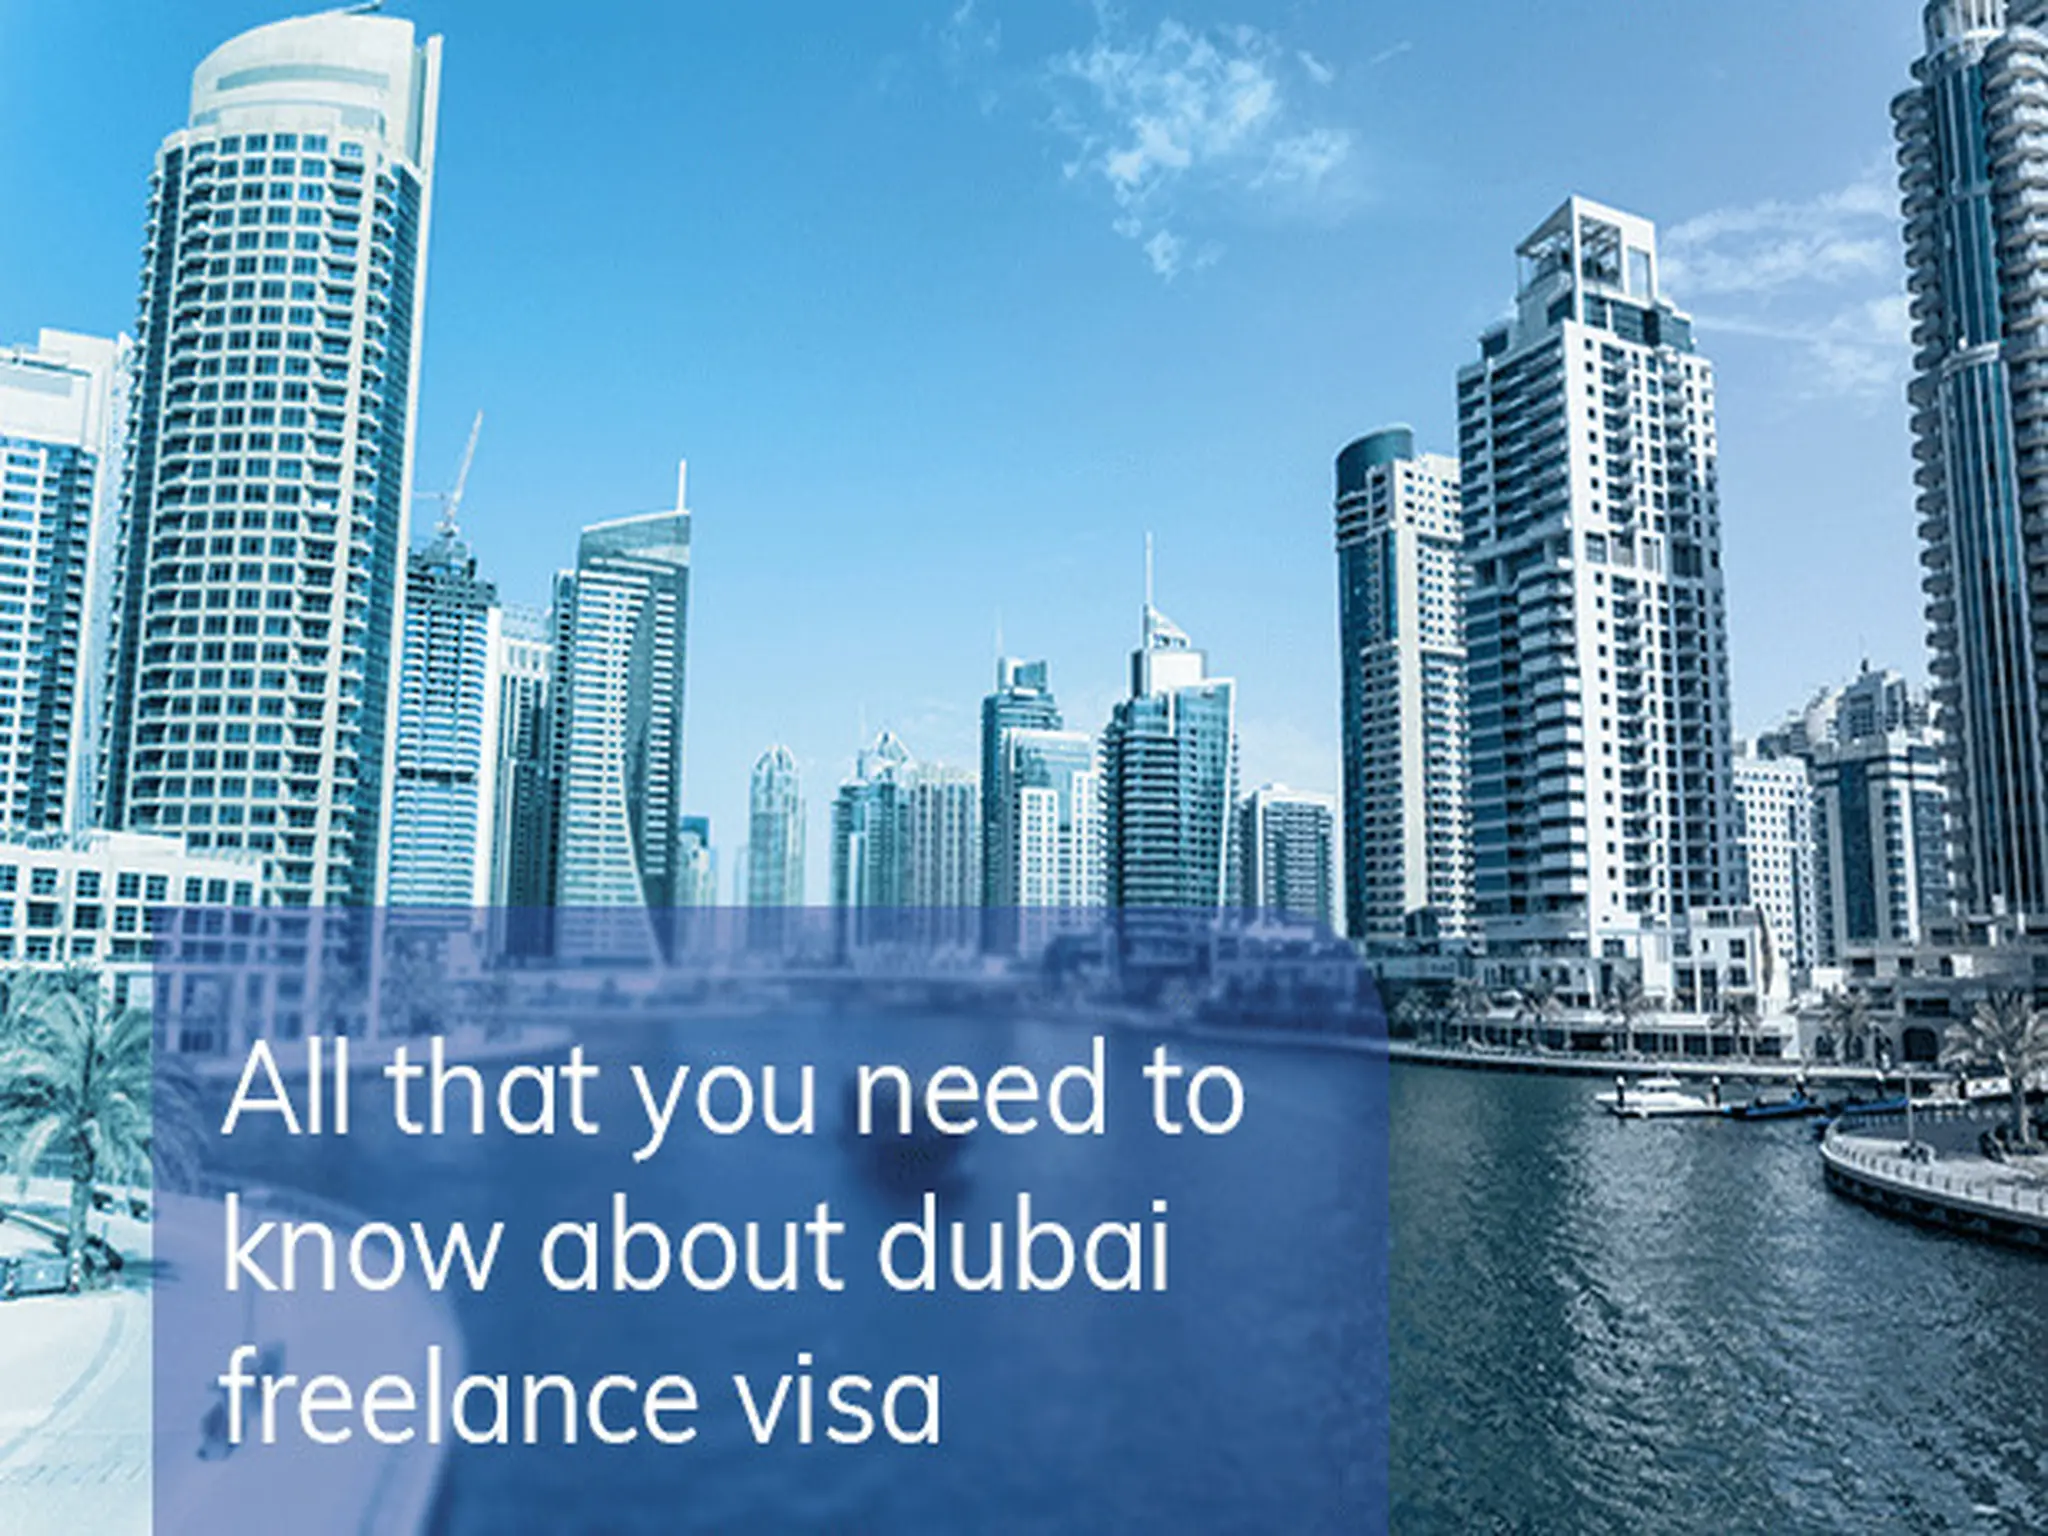 UAE : how to apply for a freelance visa and required documents 2023